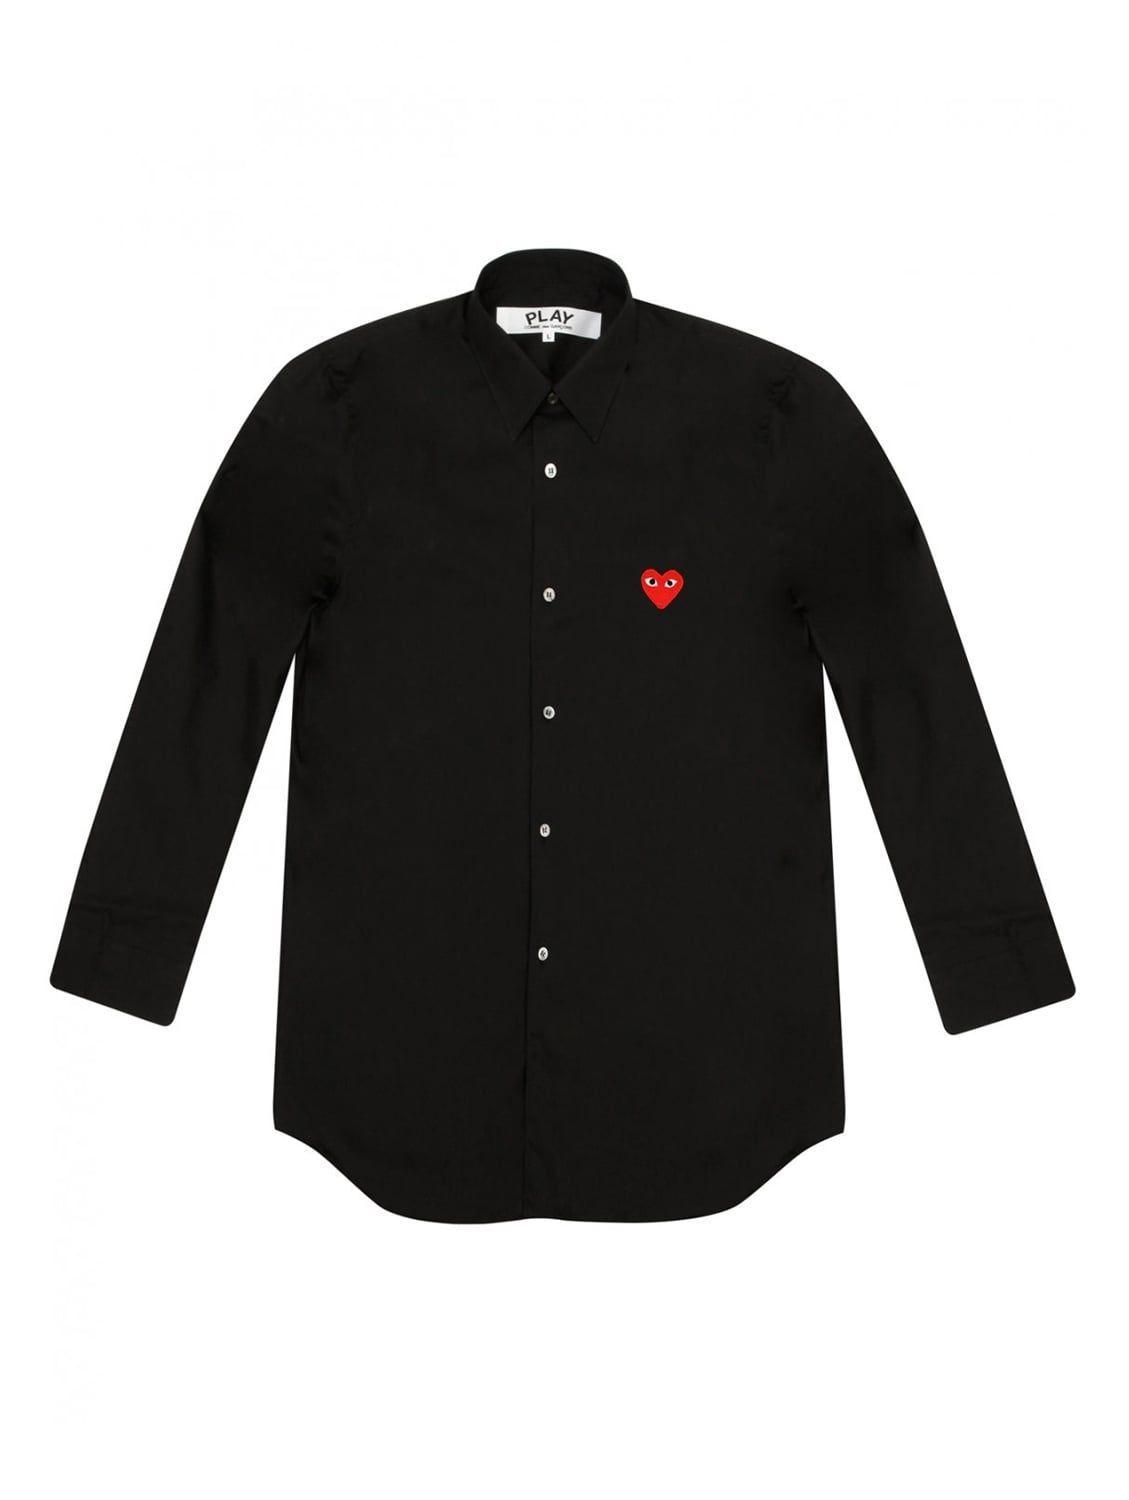 Black On Red Heart Logo - Comme des Garcons Play Red Heart Formal Shirt in Black. Hervia.com